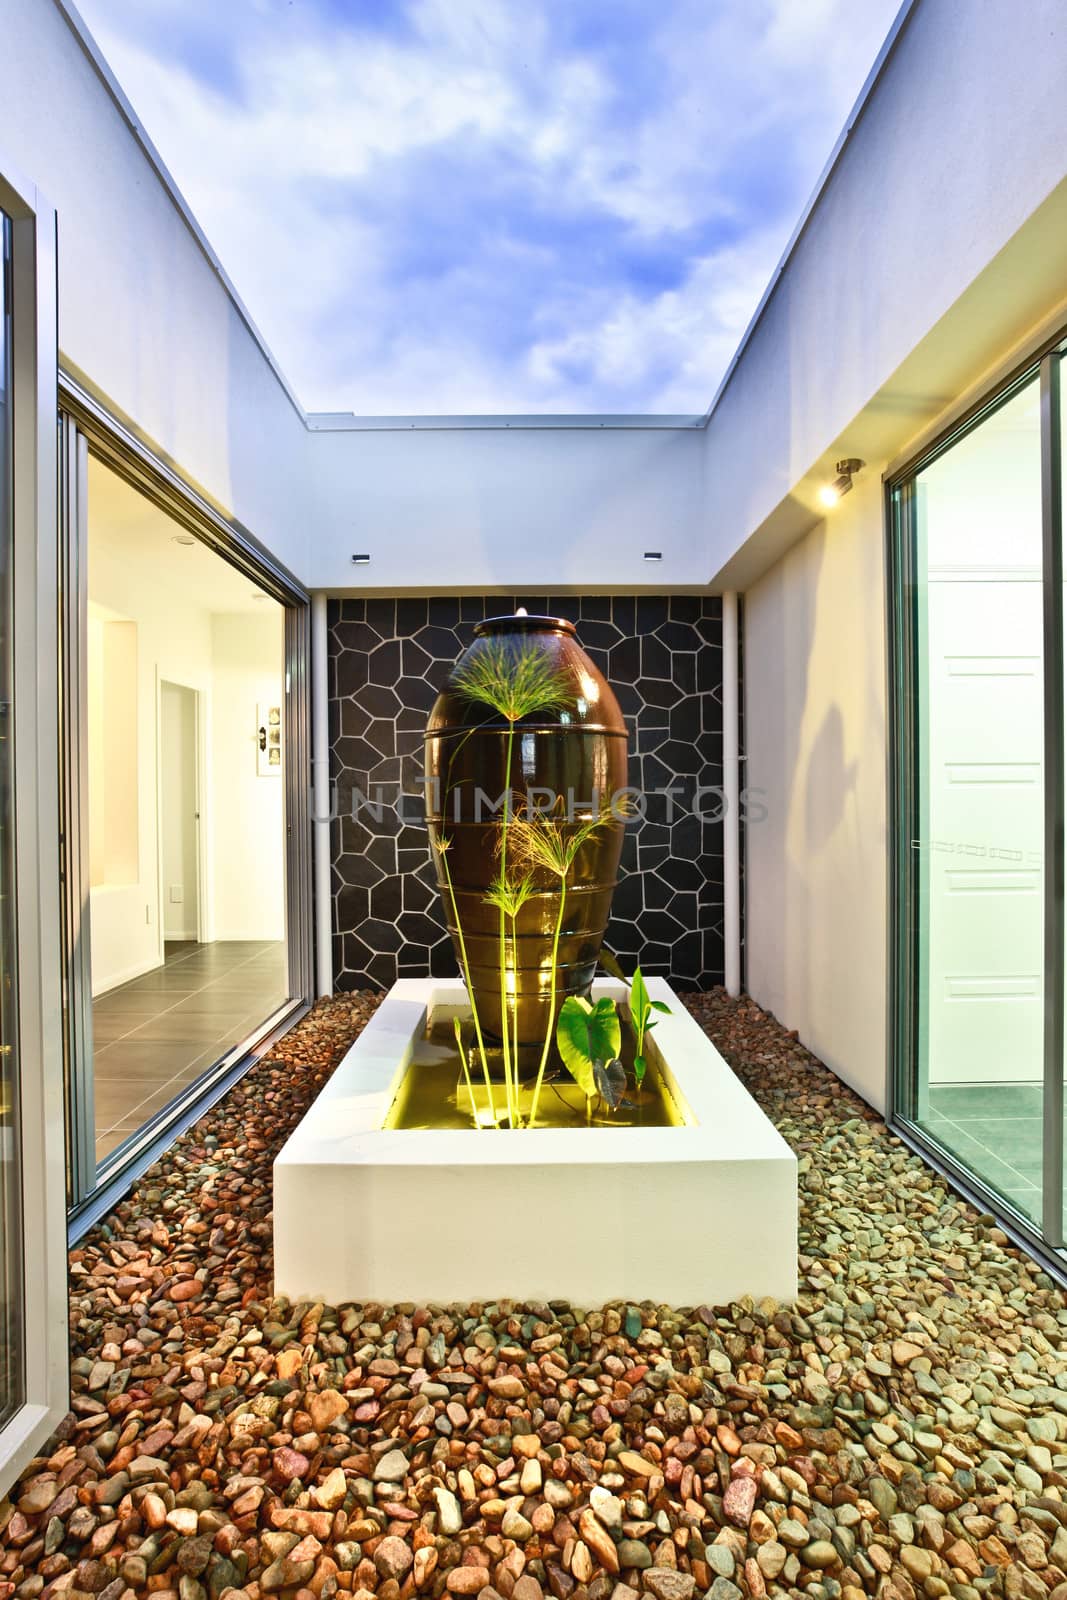 Modern sculpture in a courtyard strewn with natural pebbles running between two wings of a luxury house with large glass windows